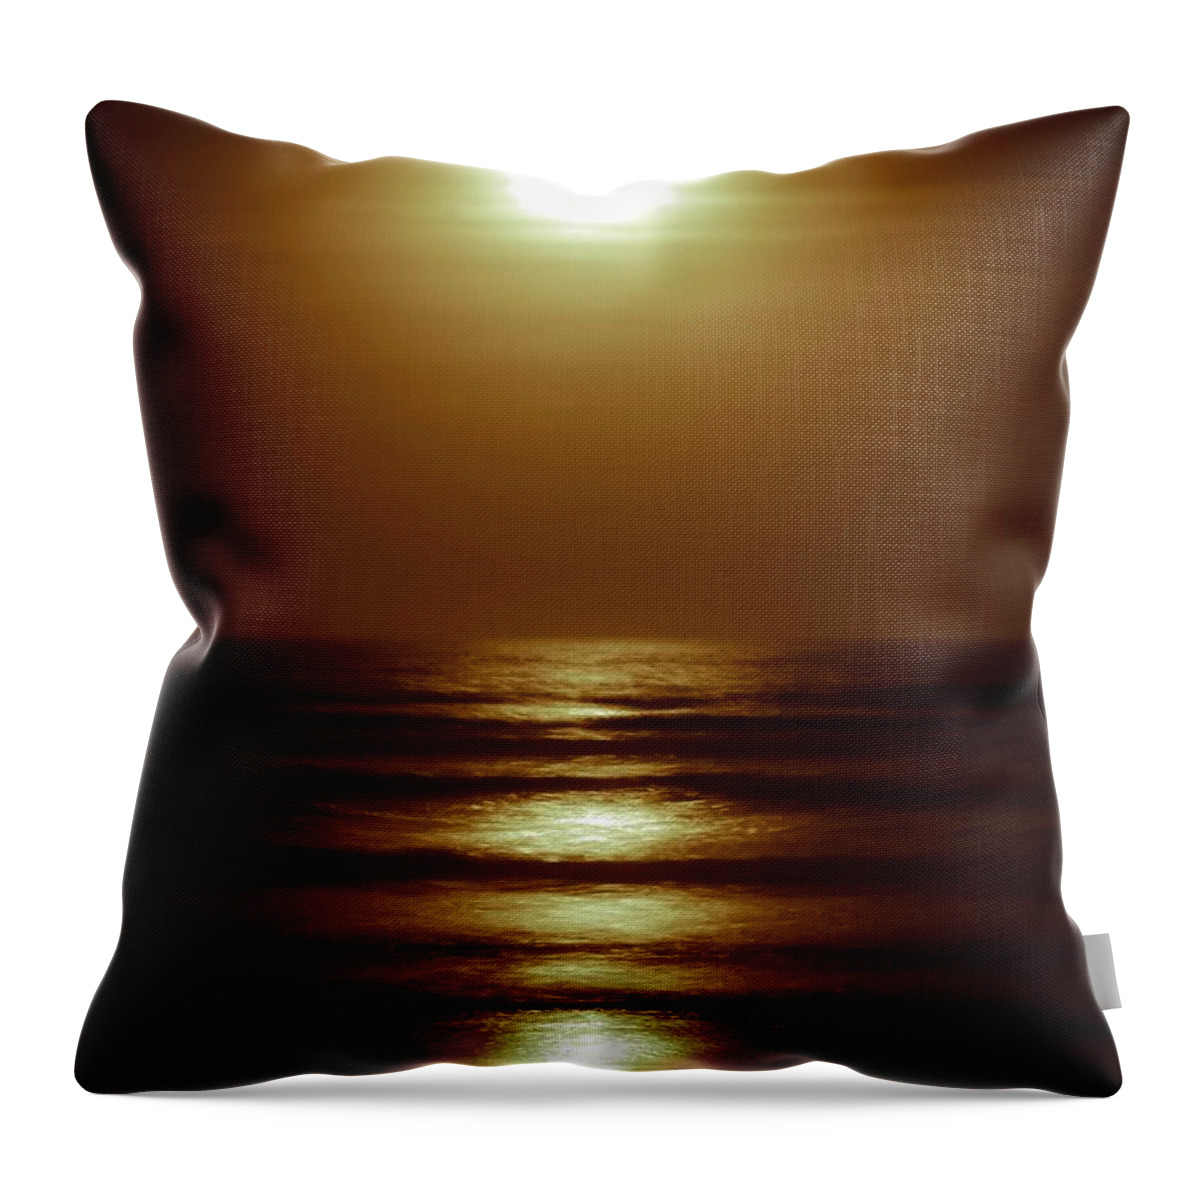 Moon Throw Pillow featuring the photograph Lunar Tides I by DigiArt Diaries by Vicky B Fuller